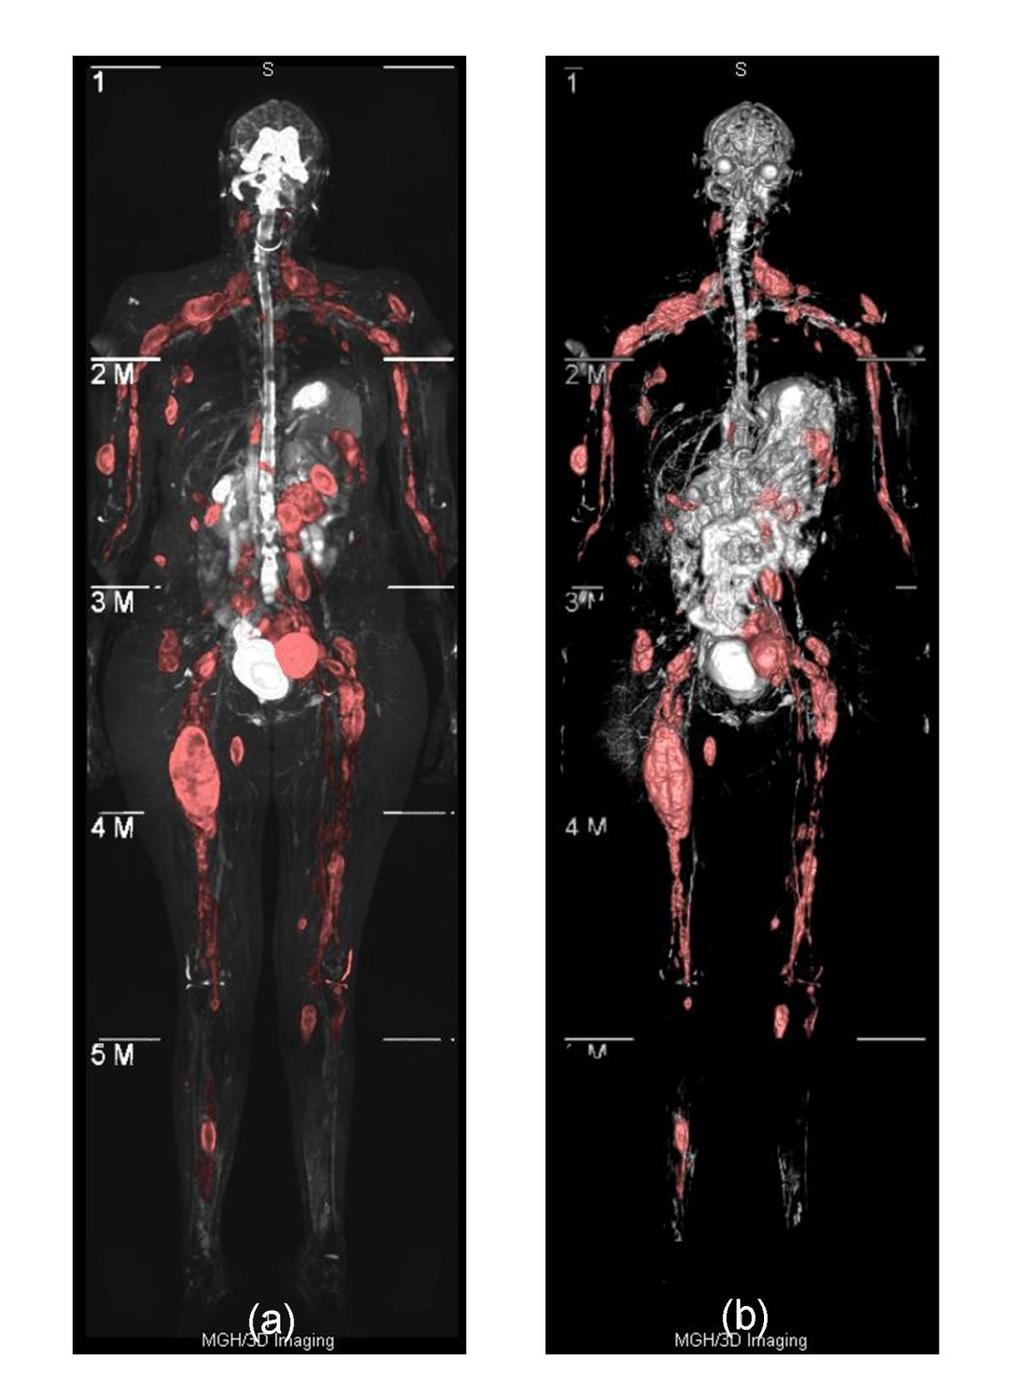 Neurofibromatosis 1 Genotype is known Imaging used for surveillance of disease manifestations: Has the disease